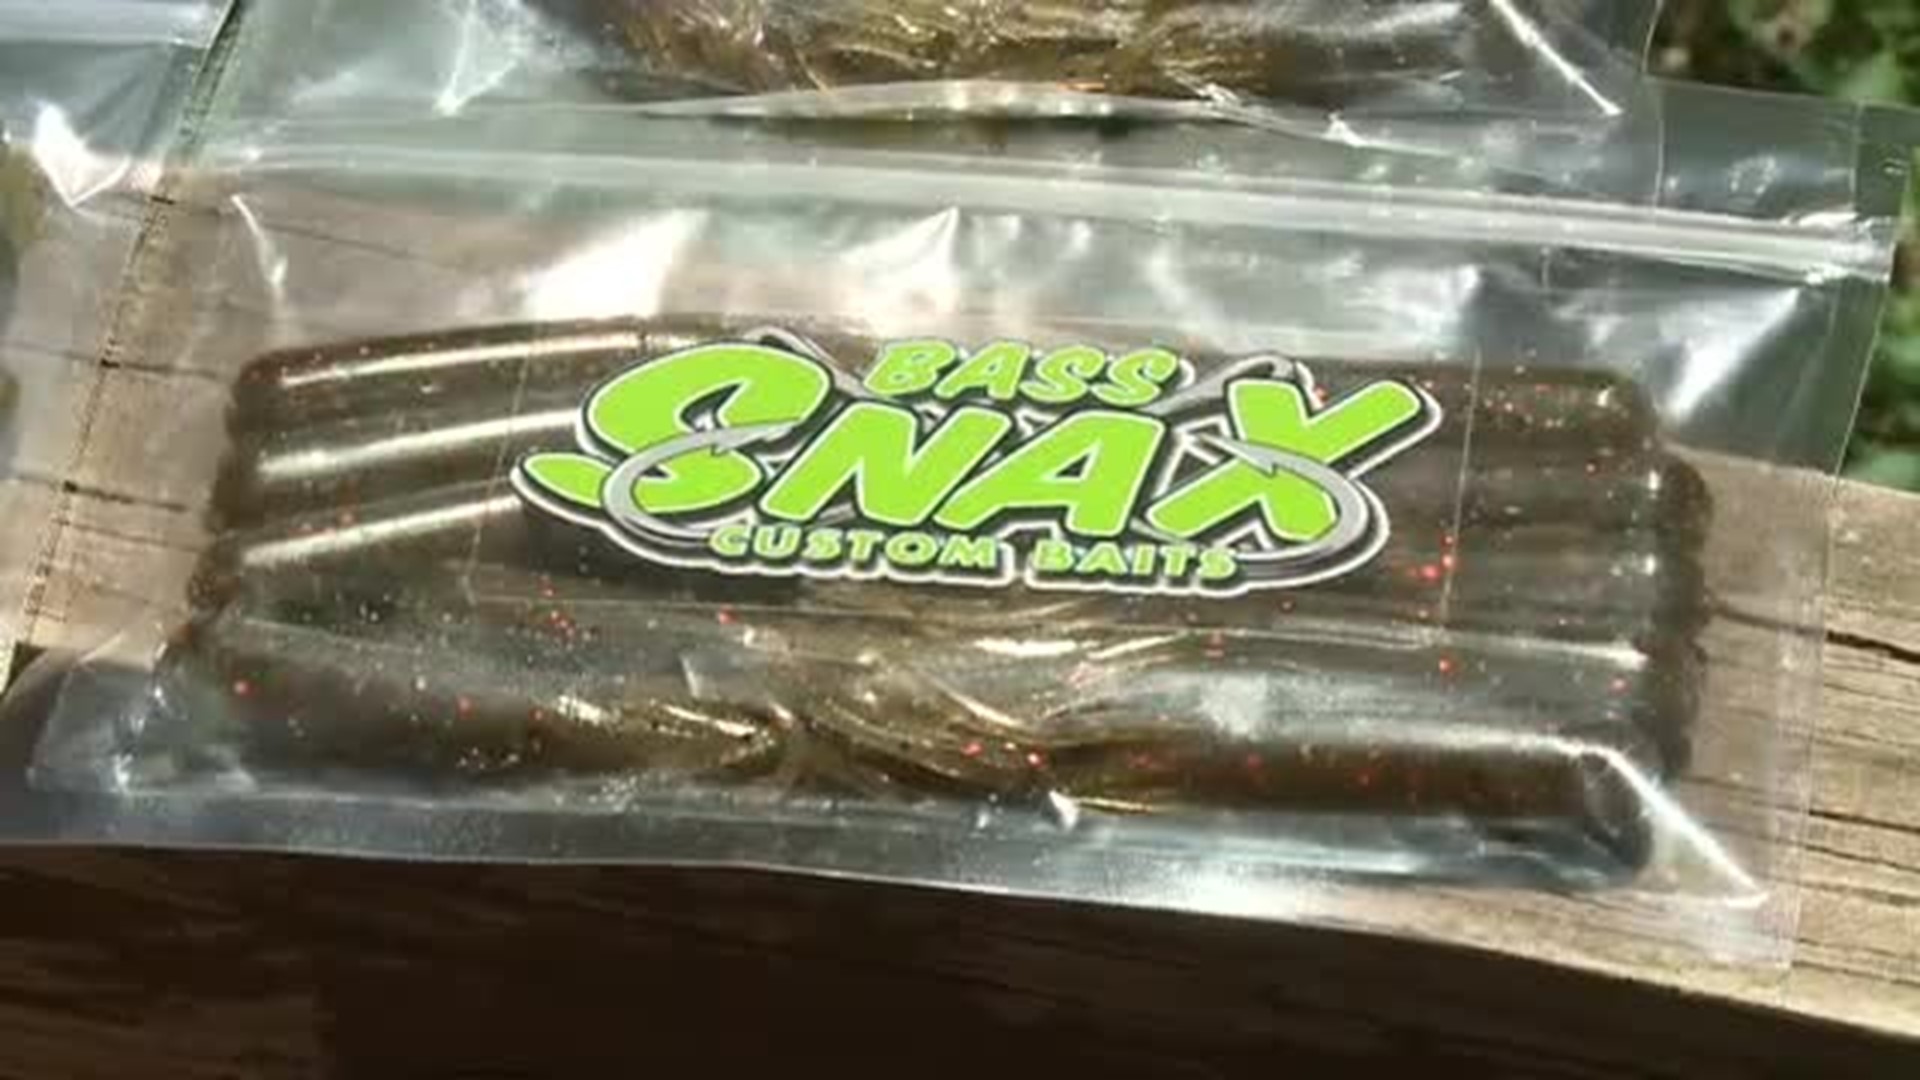 Bass Snax Product Giveaway